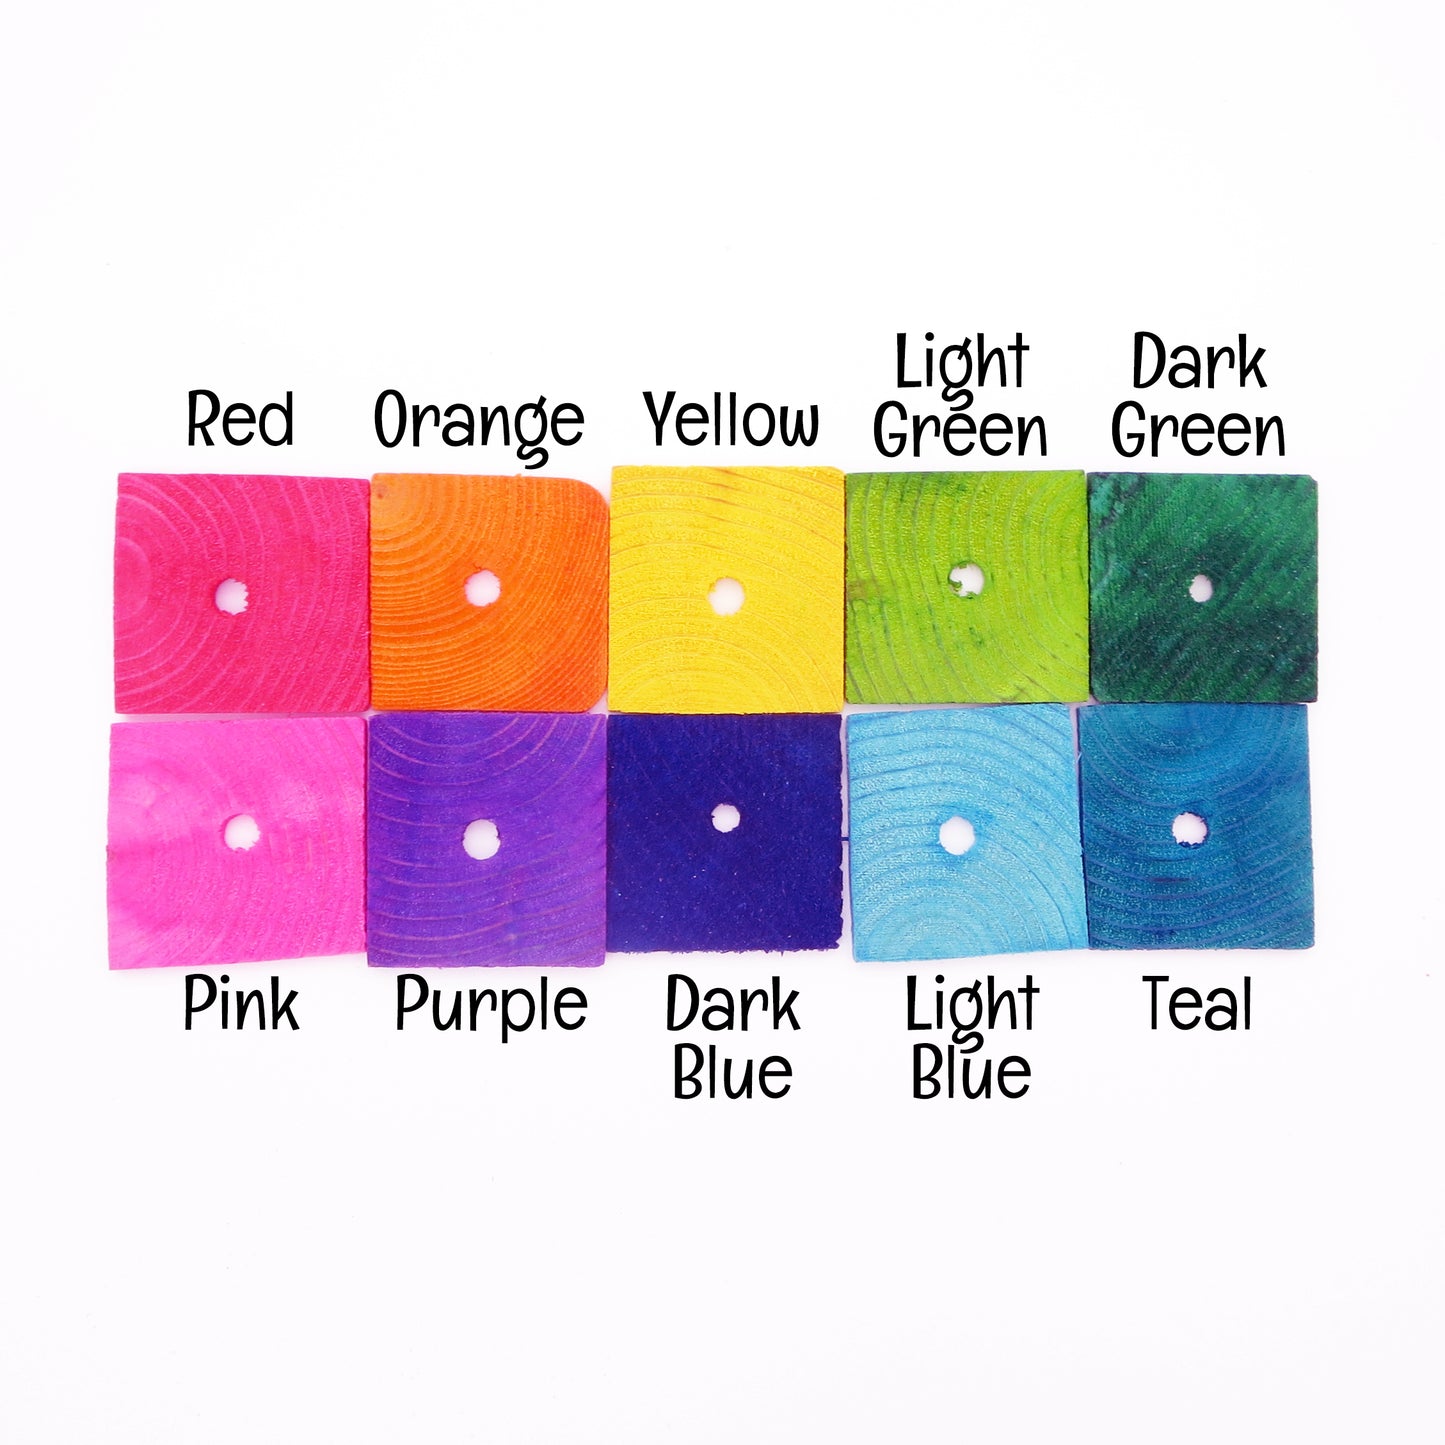 Available dye colors